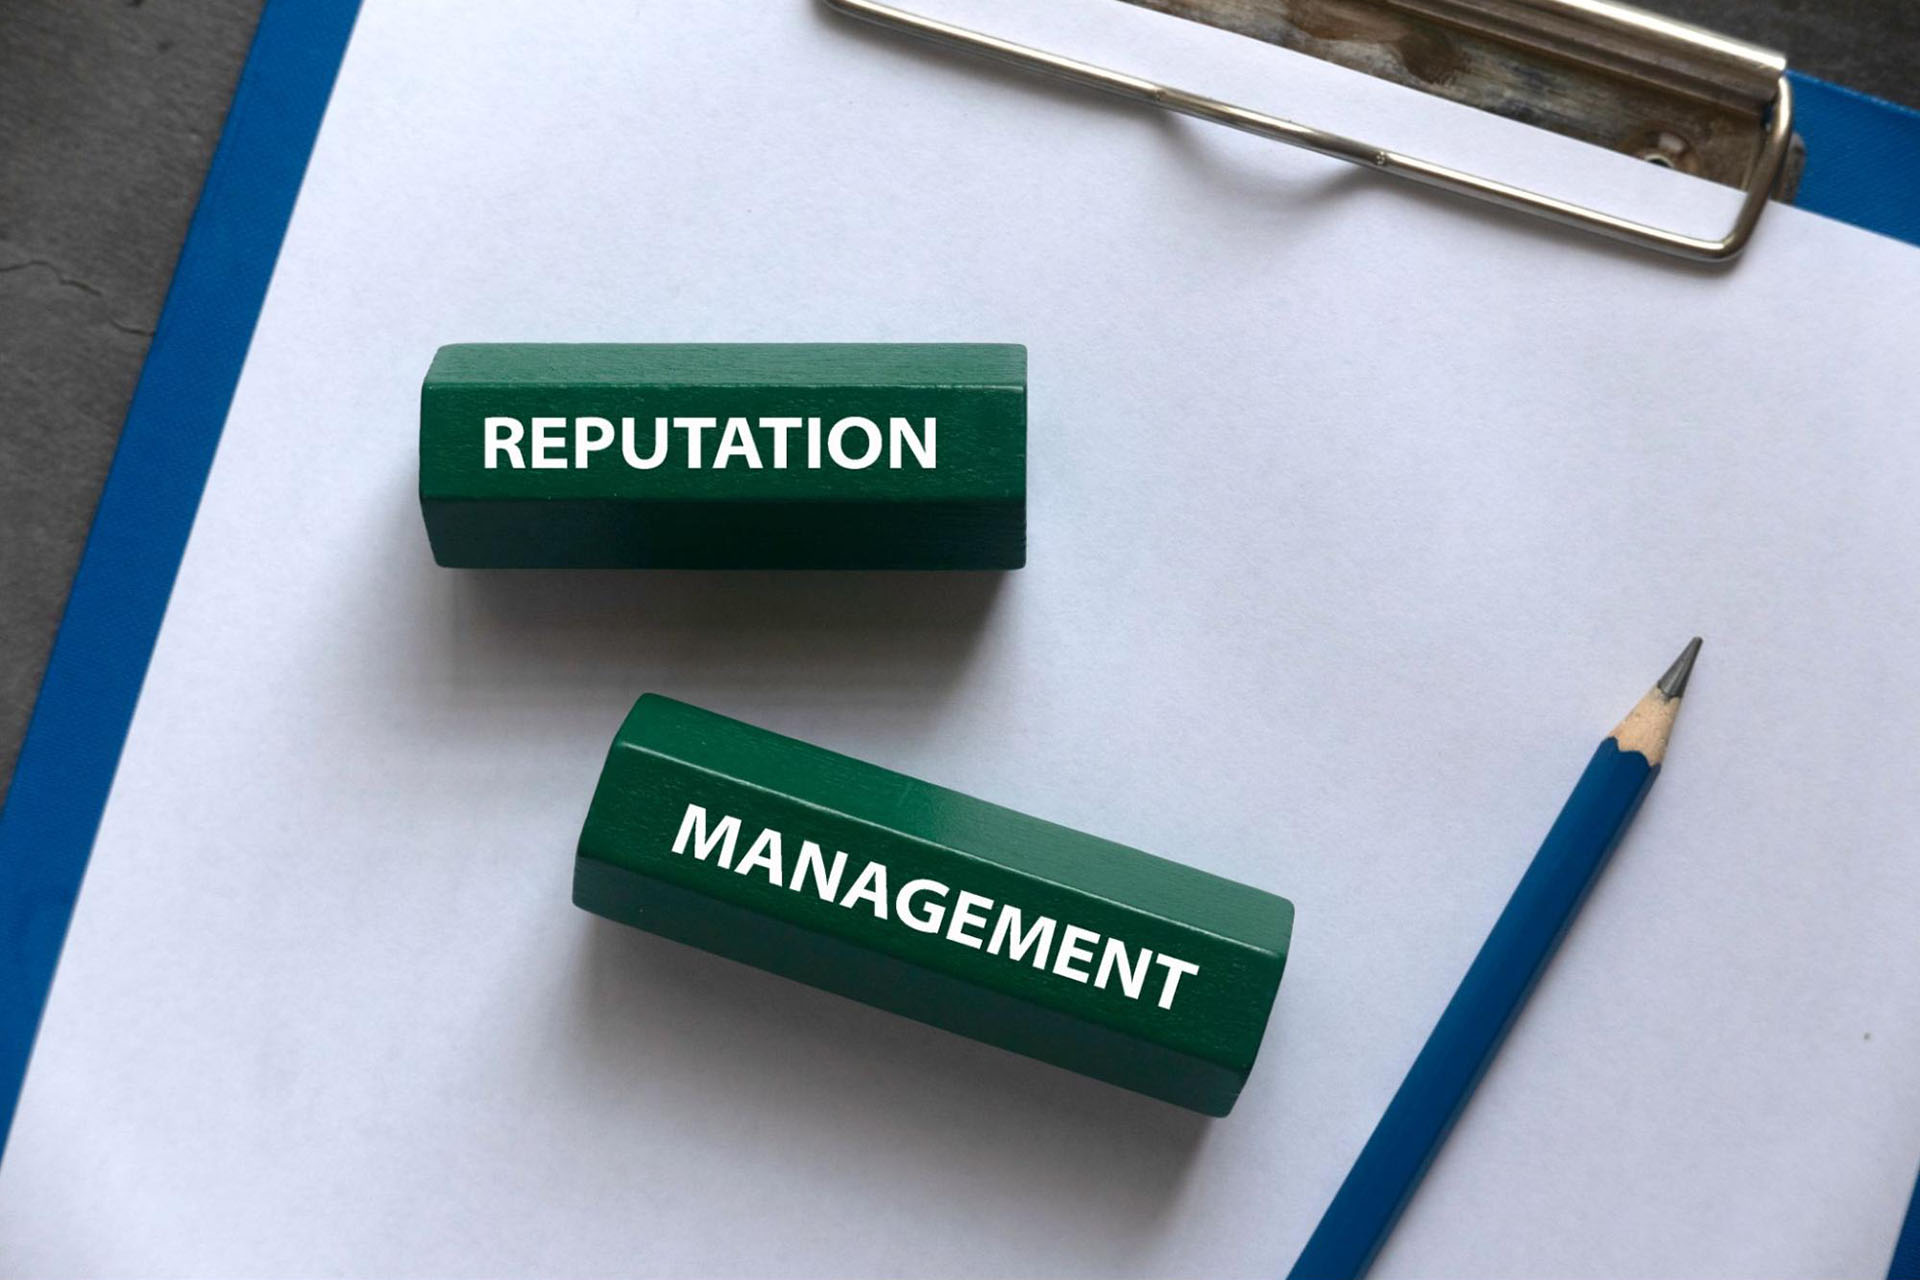 Words “reputation management” written on pieces of wood with a pencil and a clipboard in the background.